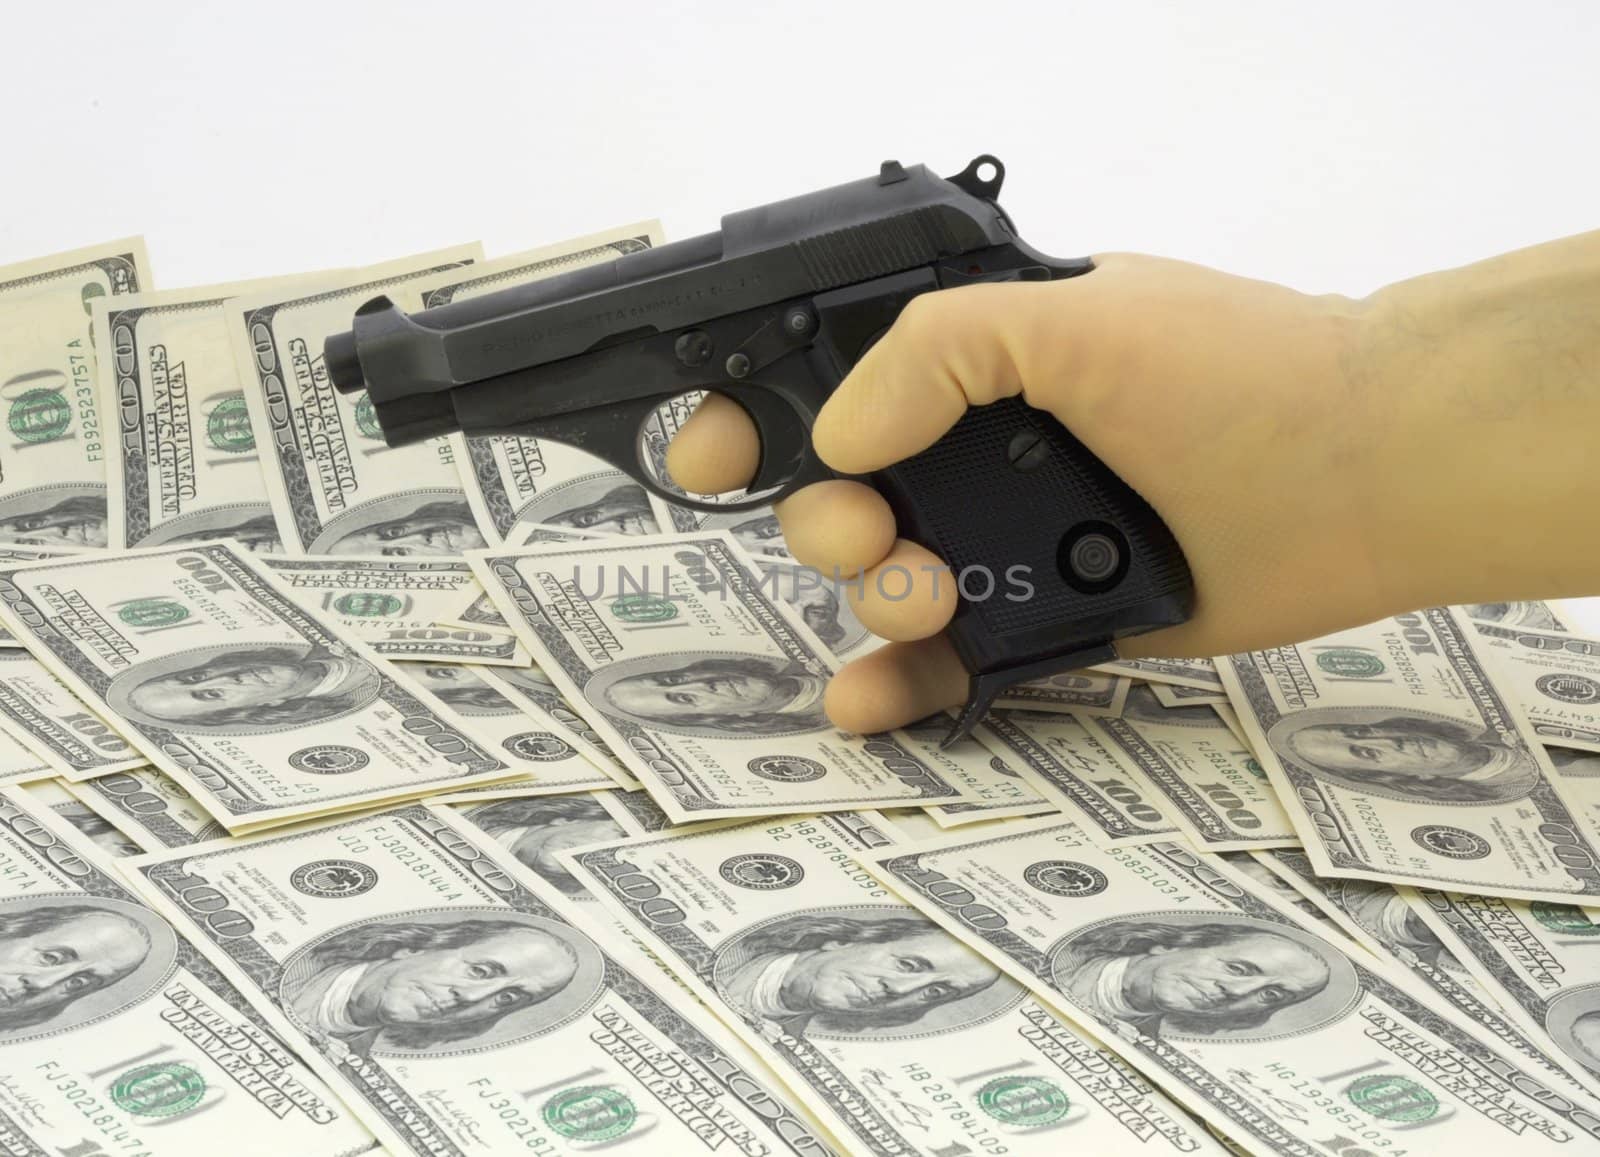 Gangster Holding a Handgun.  
Hand in a Rubber Glove Against Banknotes.